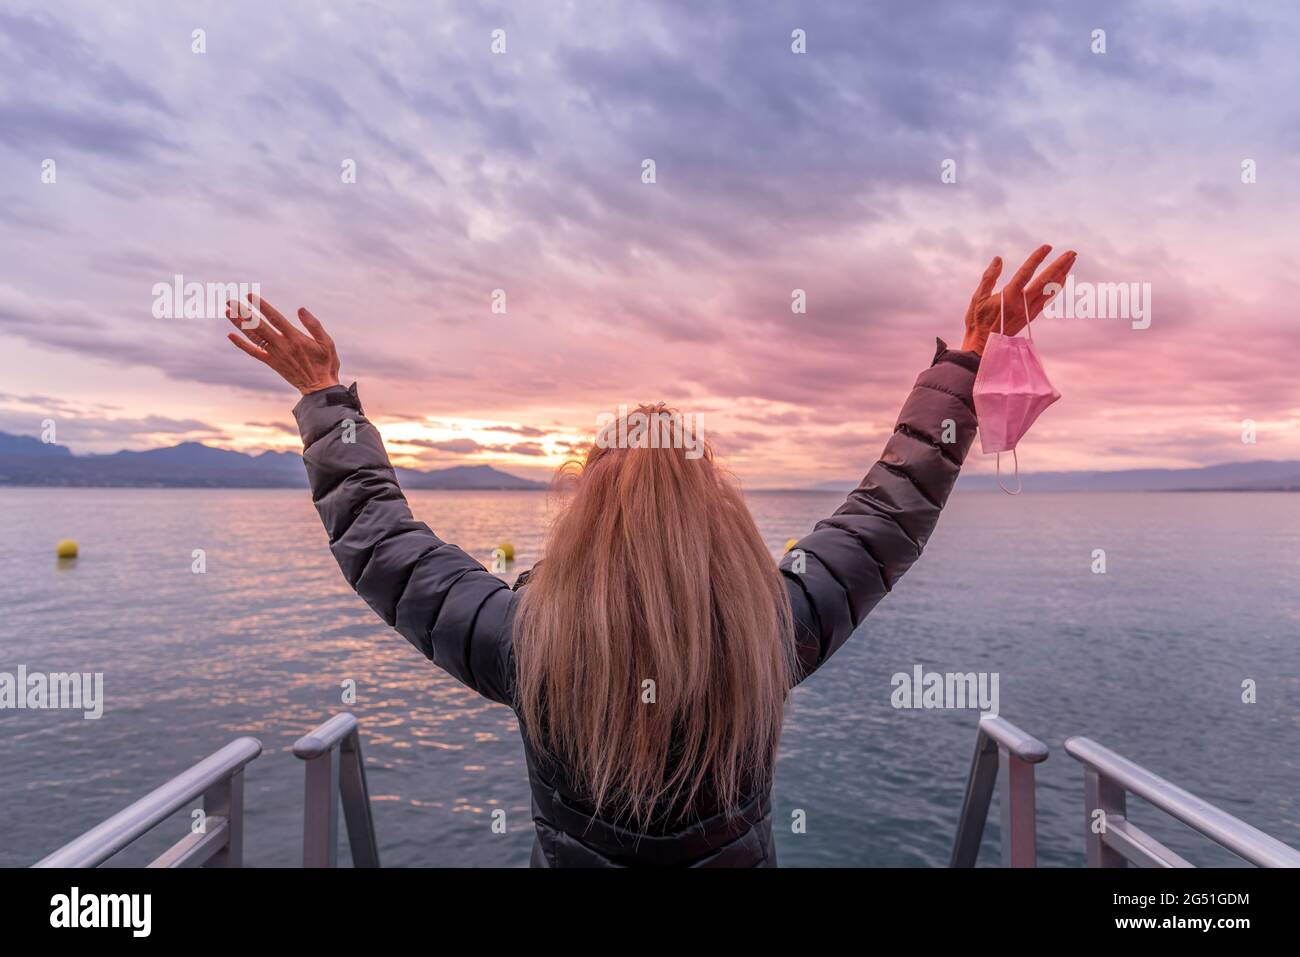 Unrecognized blonde woman in the coast raising her arms and holding her face mask. Horizontal photo Stock Photo